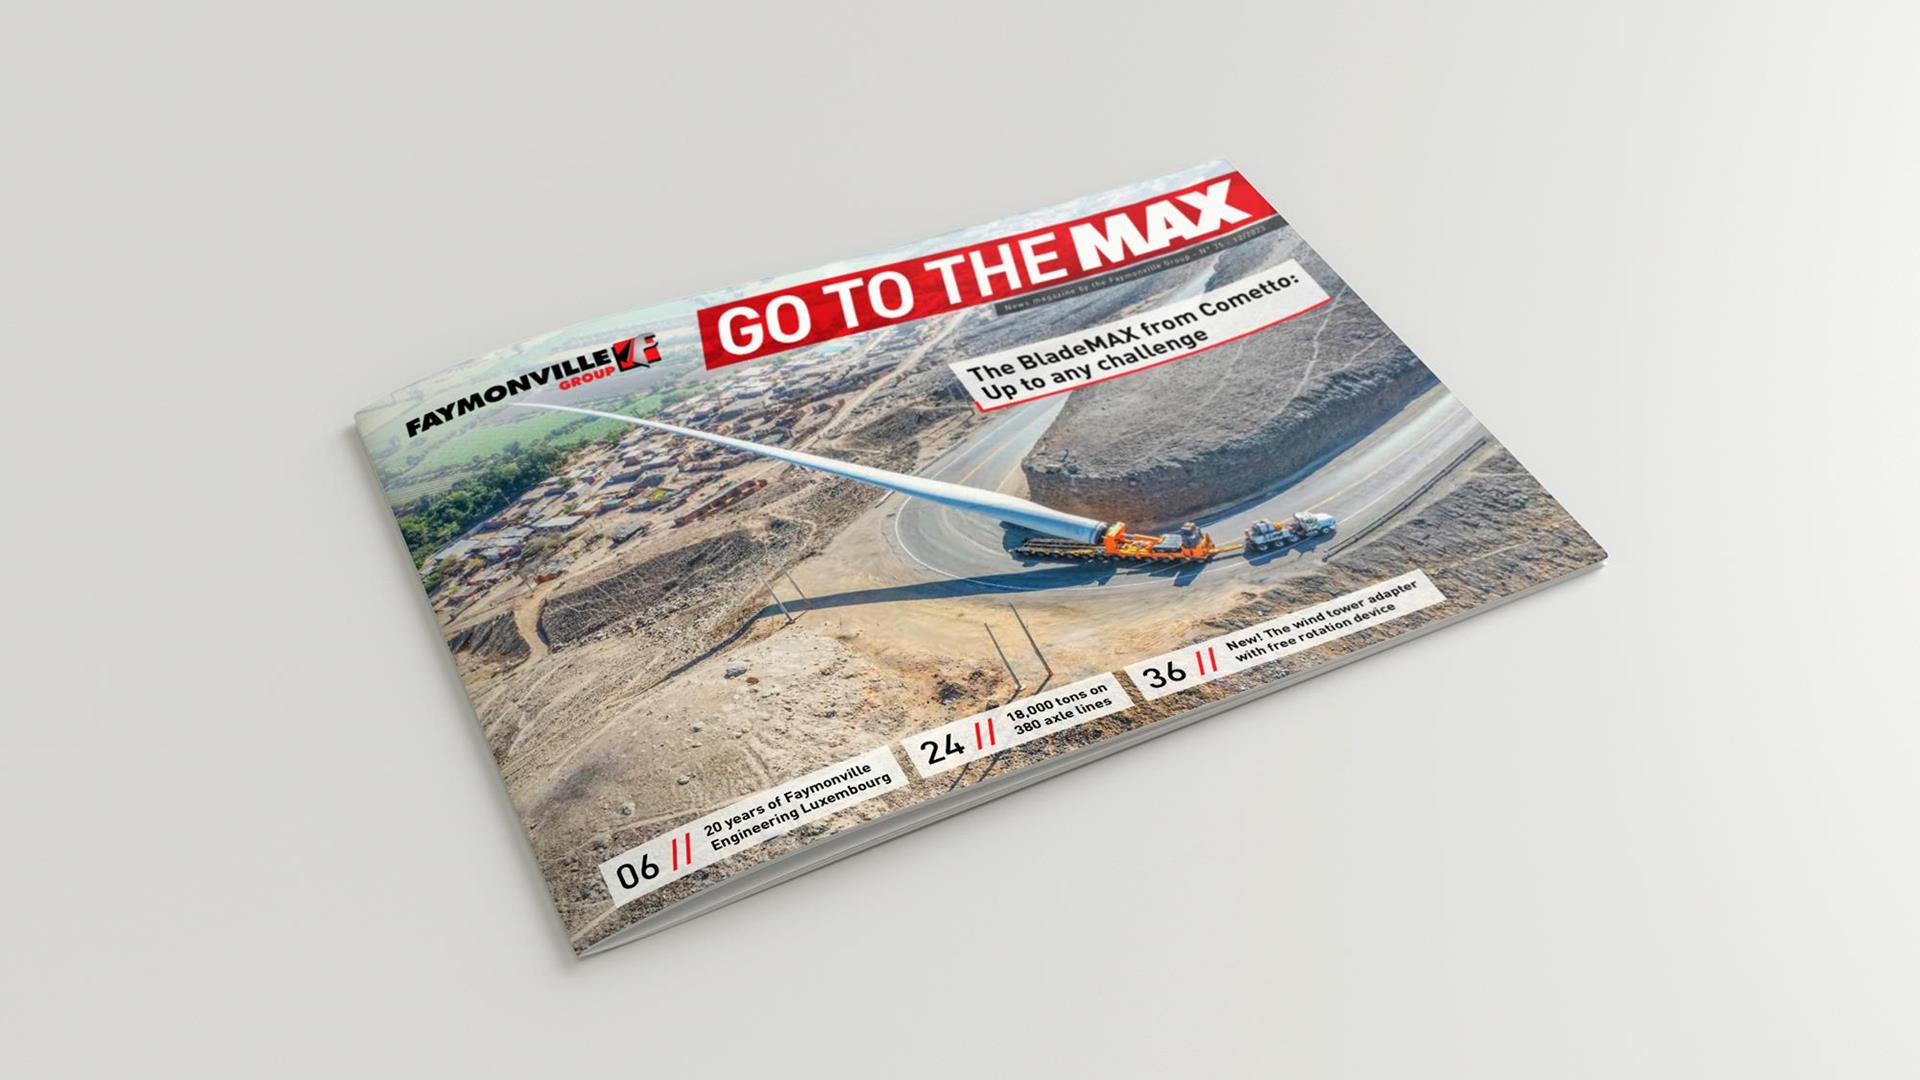 Discover the new "Go to the MAX“